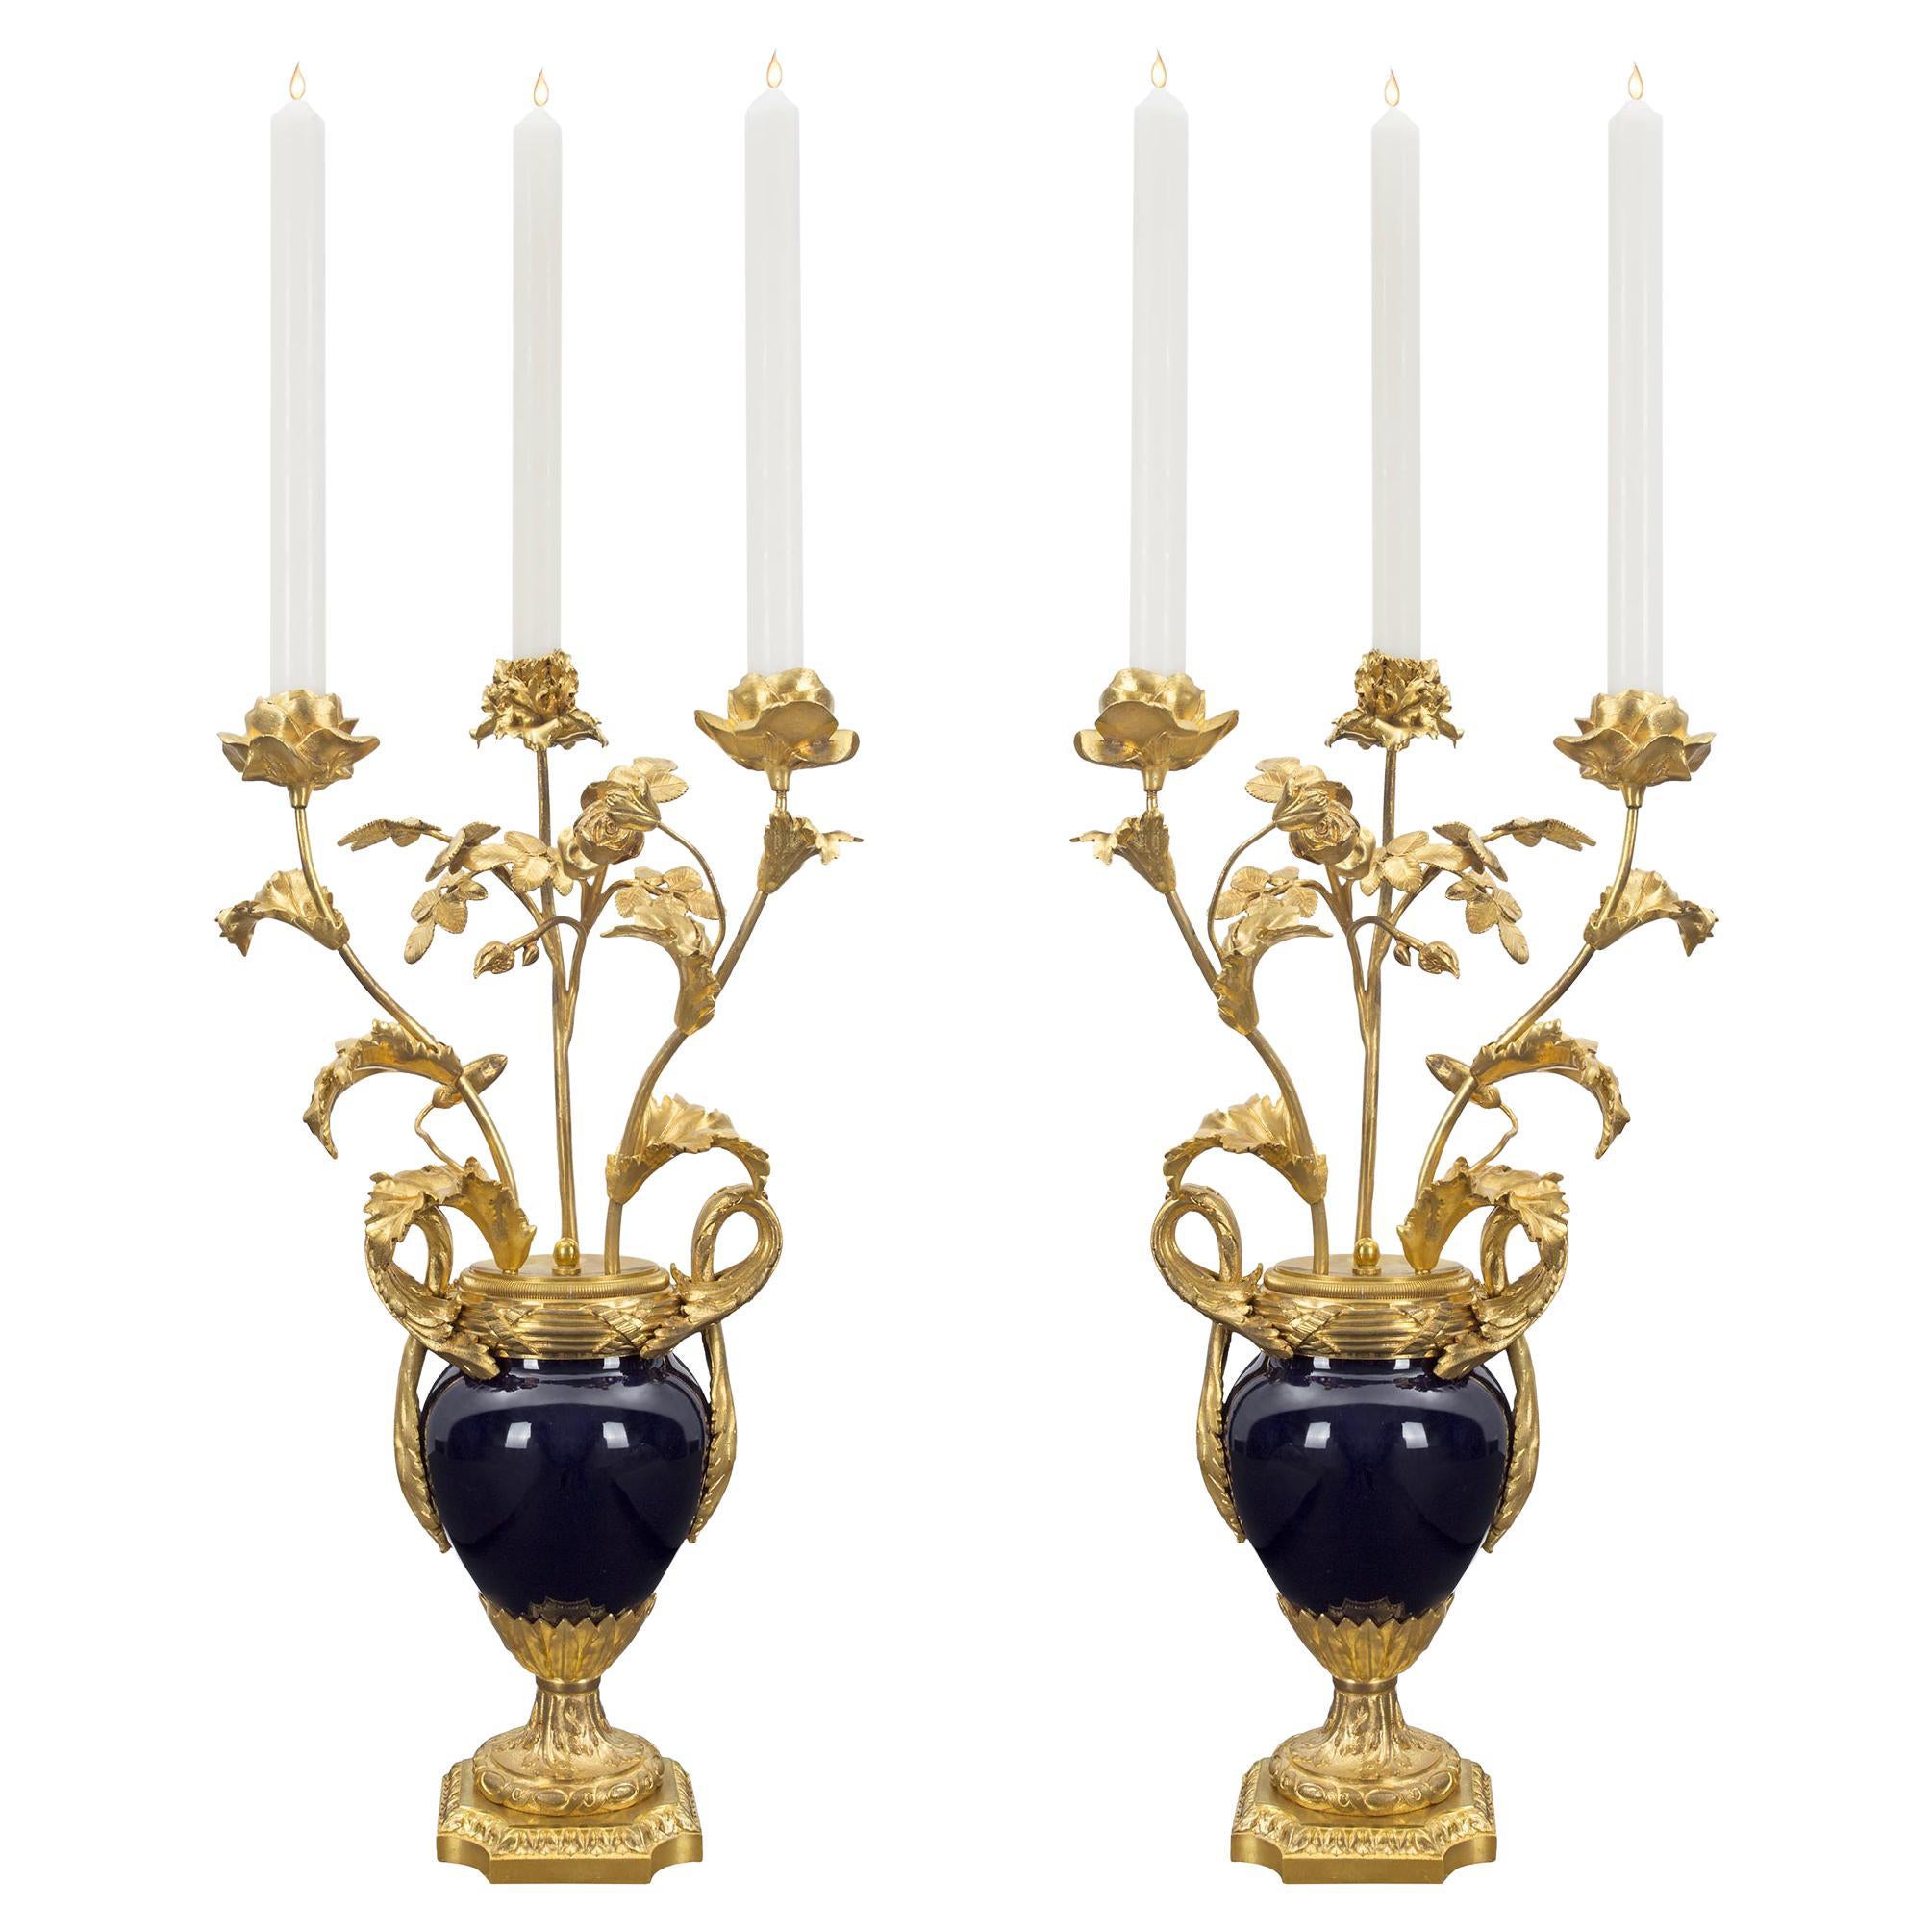 Pair of French 19th Century Louis XVI Style Sèvres Porcelain Candelabras